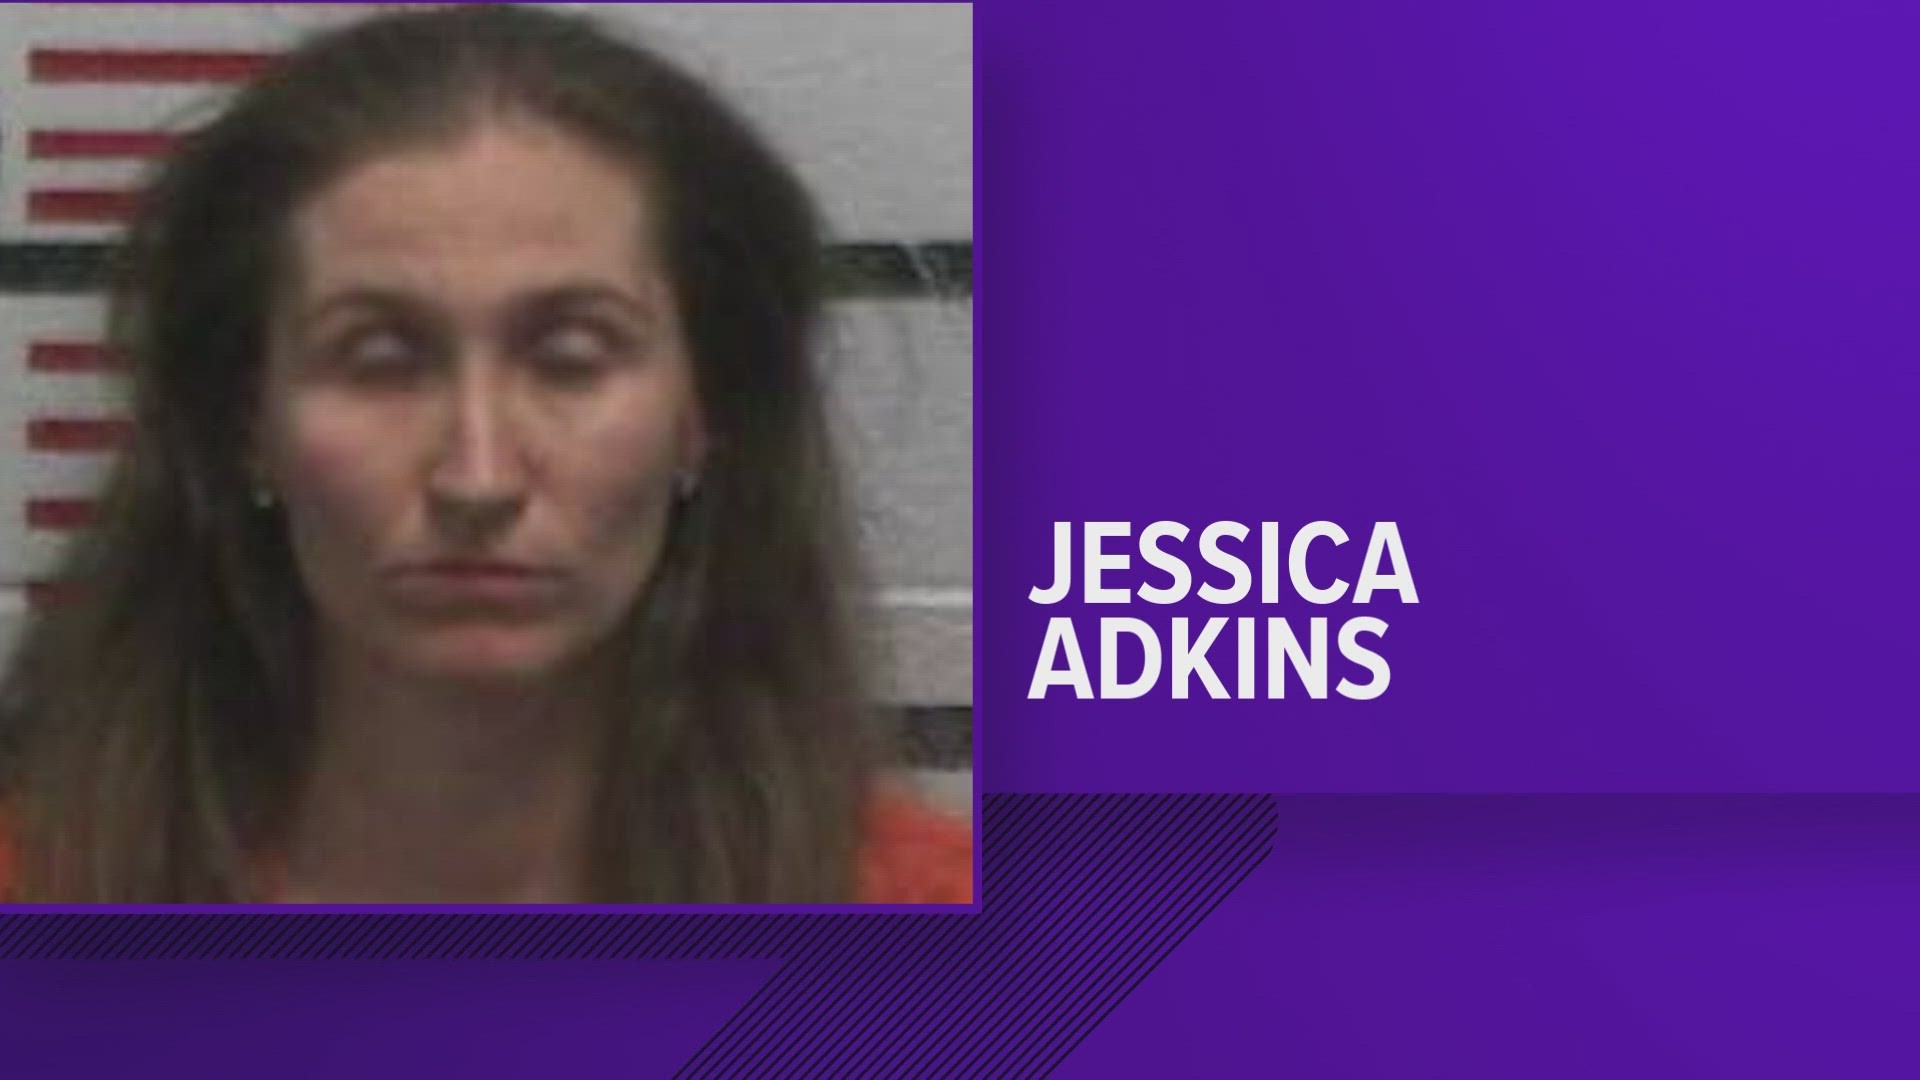 The Scott County Sheriff's Office said Tuesday that Jessica Adkins, 34, was arrested after an investigation by SCSO Drug Agents.